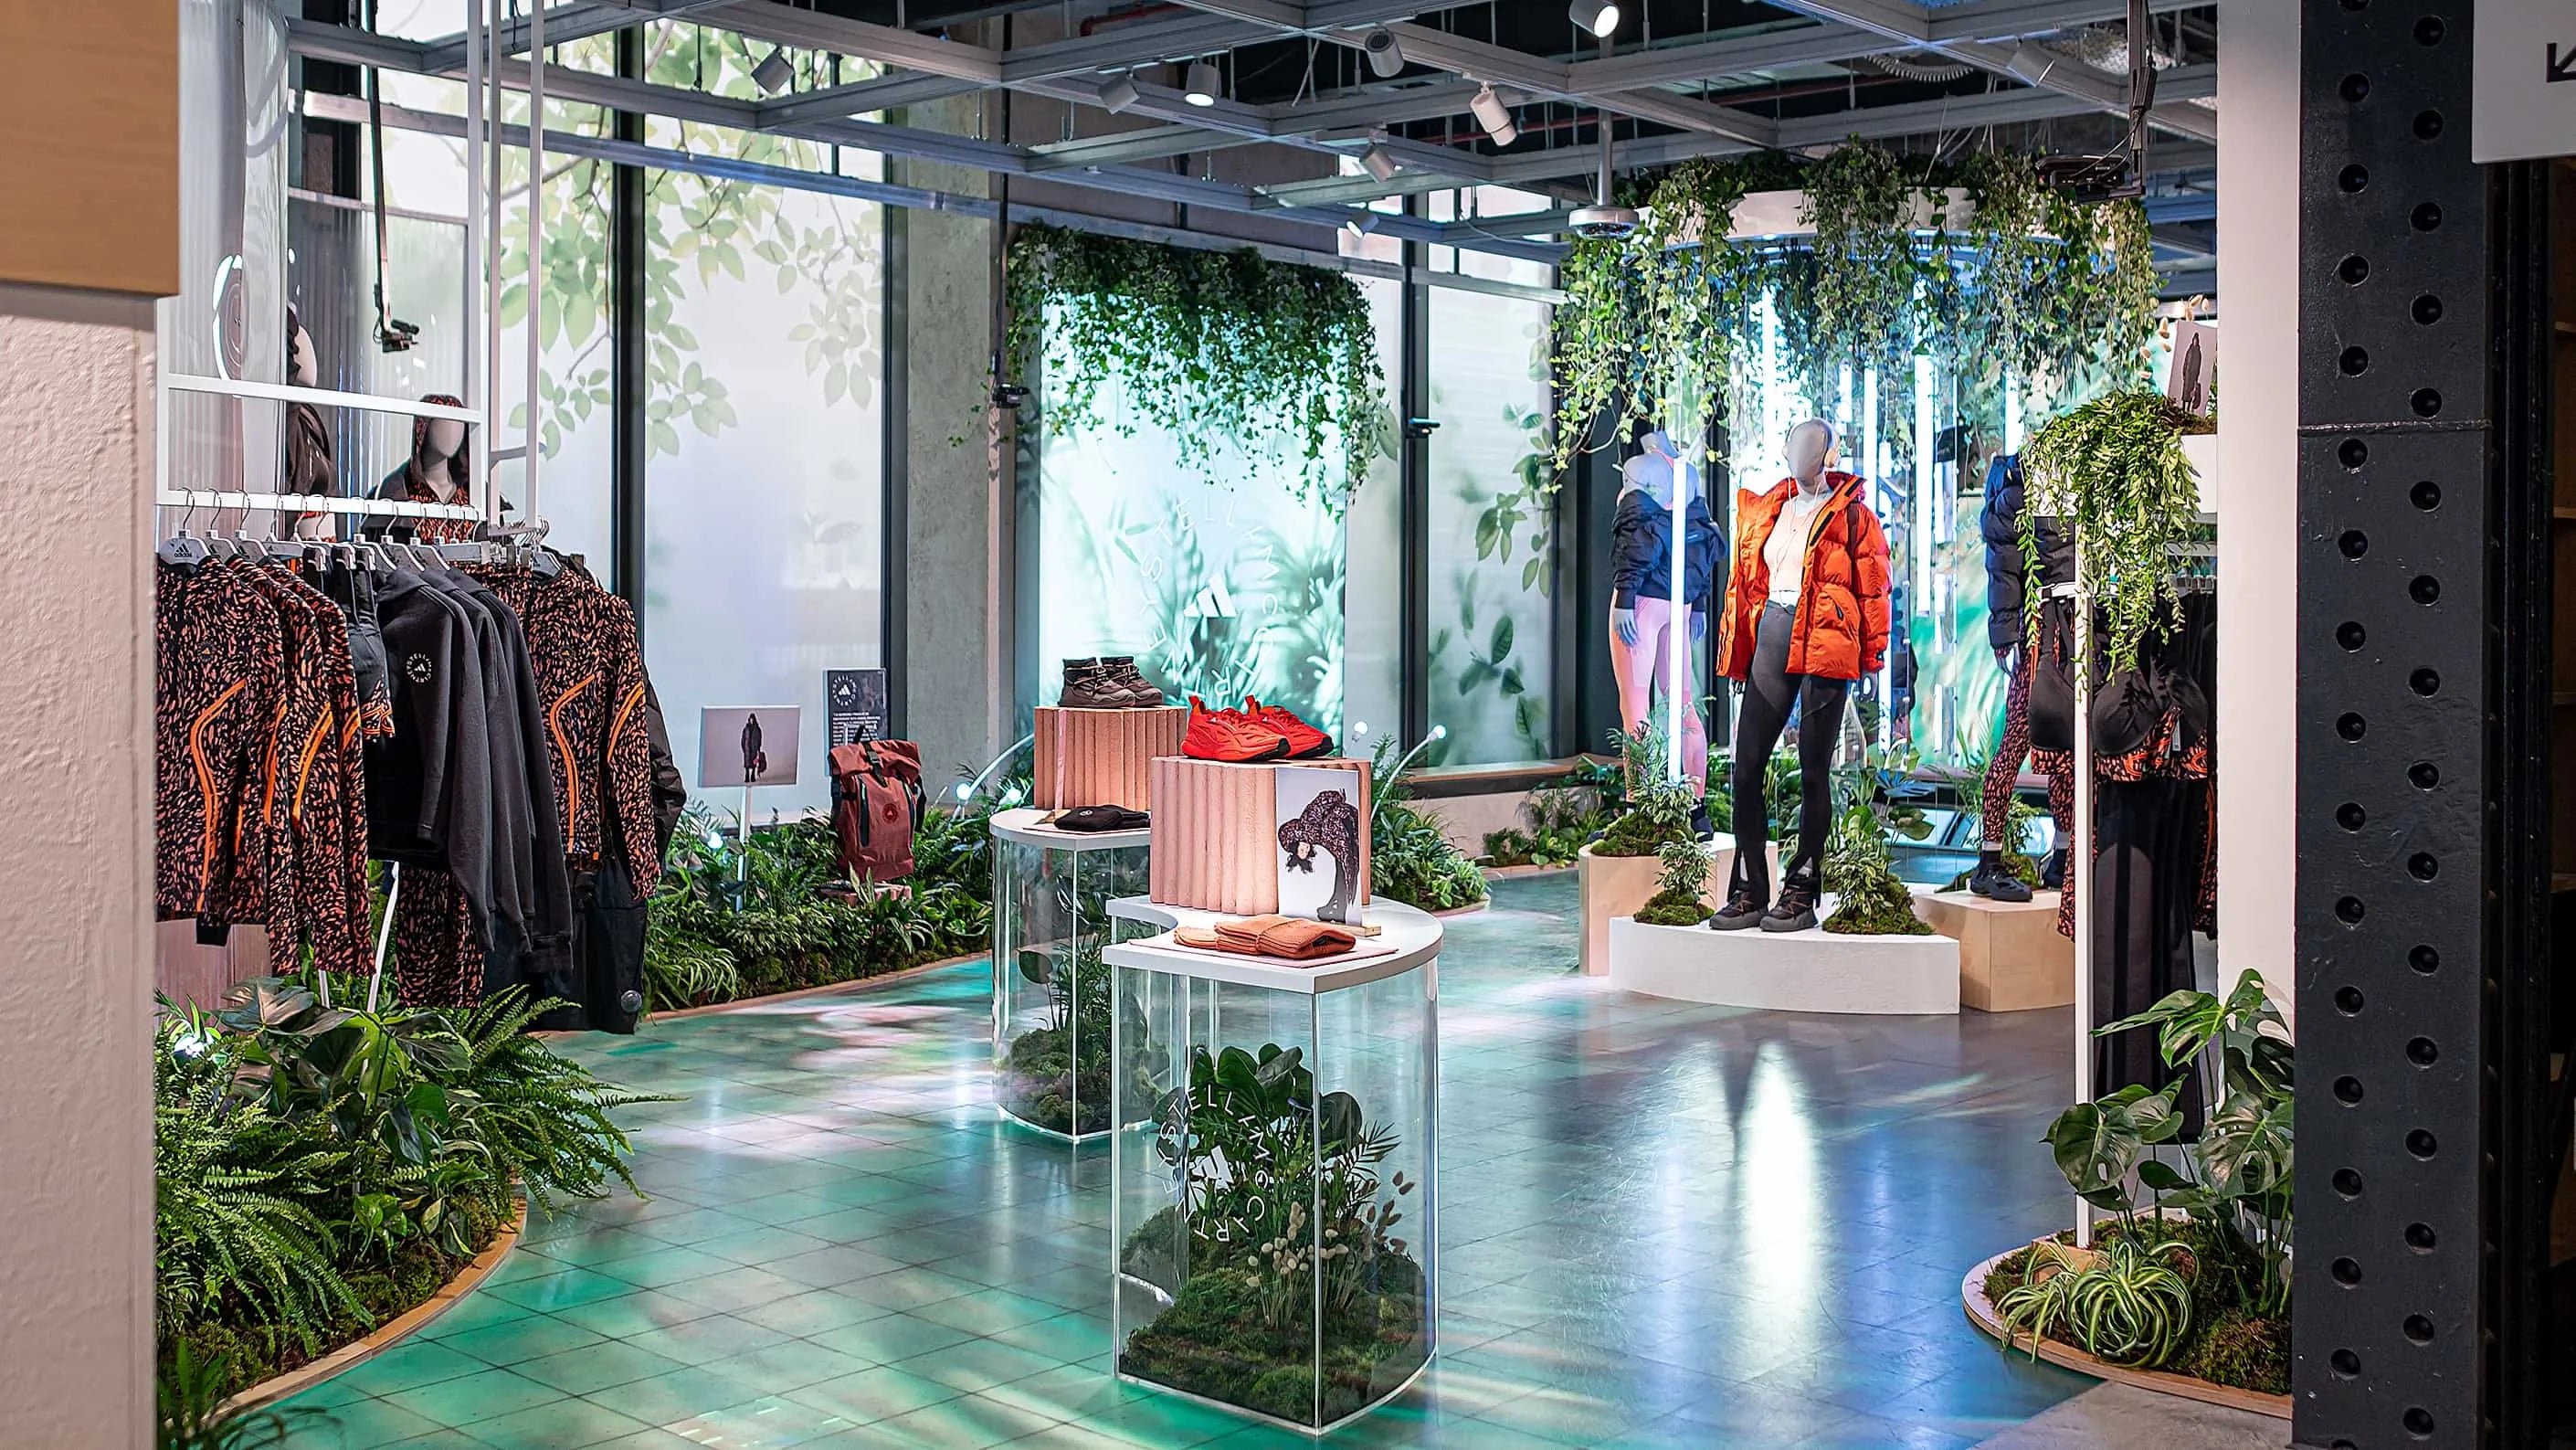 Amaranté London displays its sophisticated event floristry at Adidas x Stella McCartney's aSMC collection launch, with vibrant plant displays intertwining with the fashion-forward athletic wear. The ambience reflects a luxury storefront with a biophilic design approach.